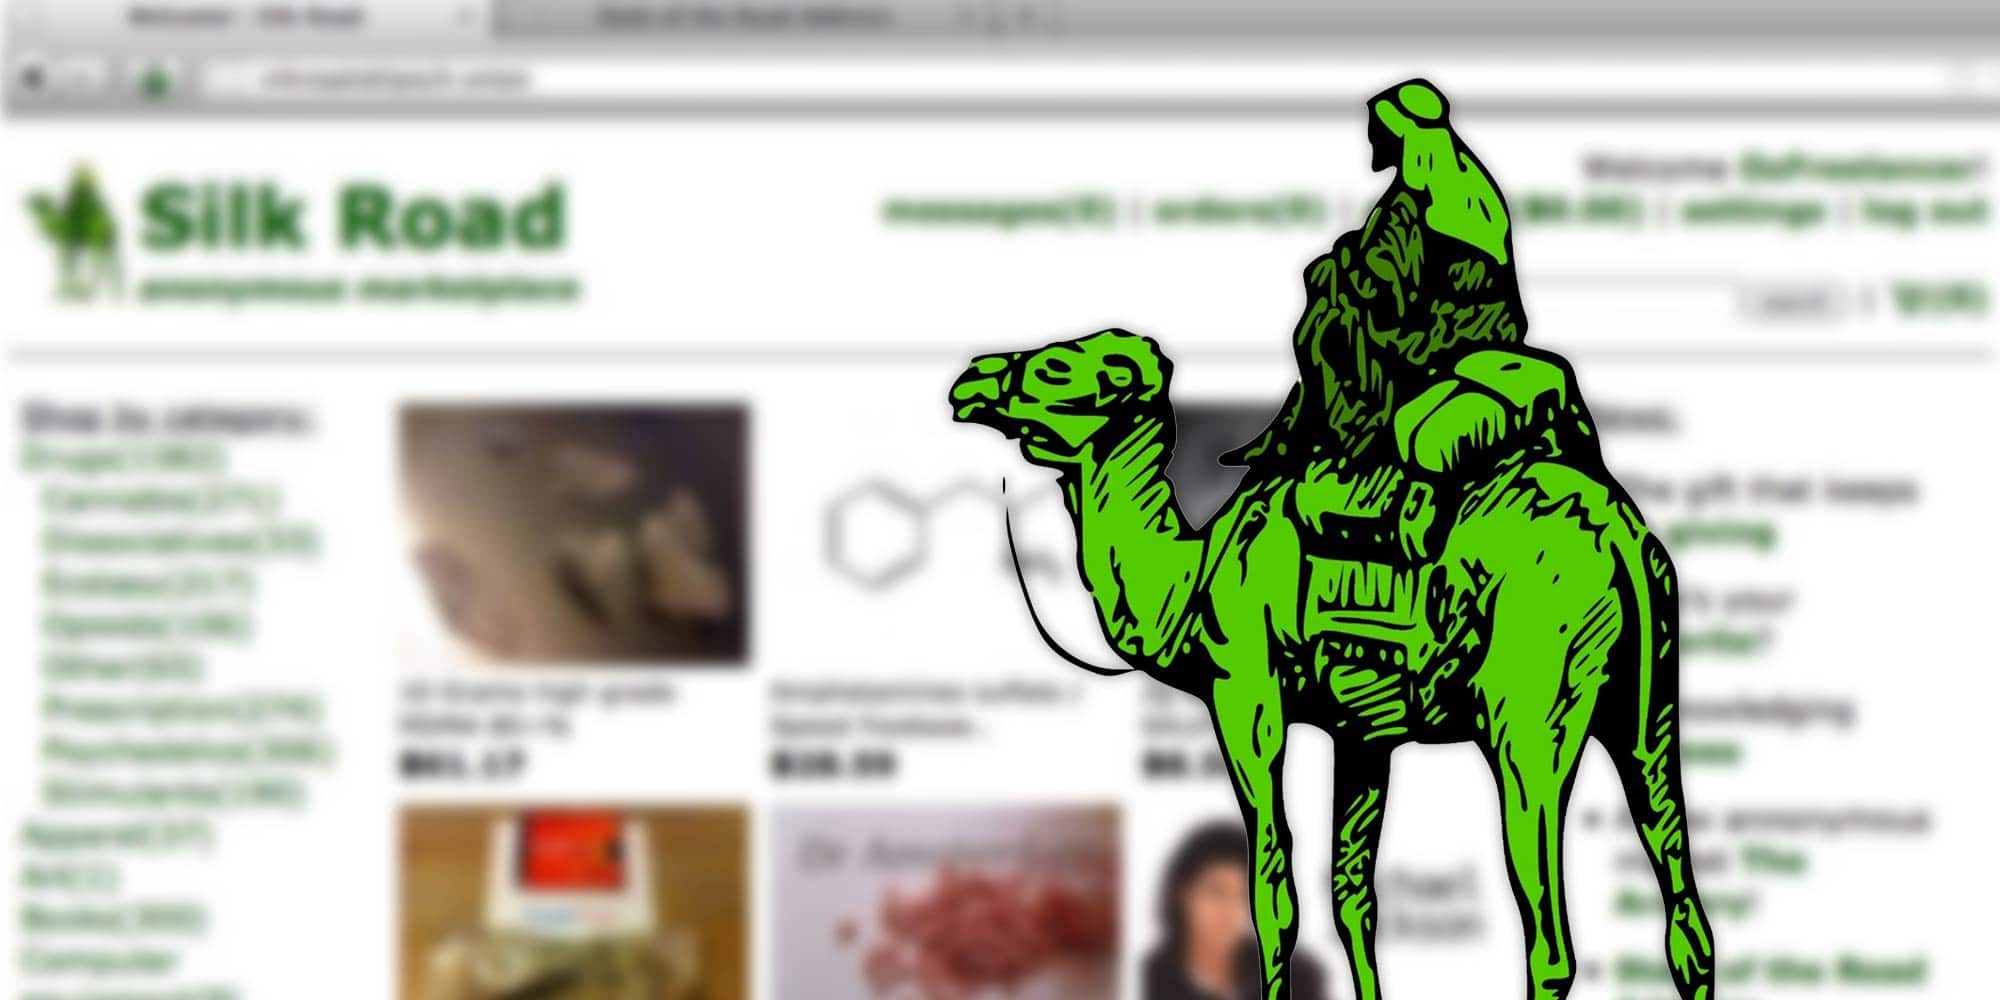 Revealing the Secrets of the Dark Web: From Silk Road to Social Security Numbers